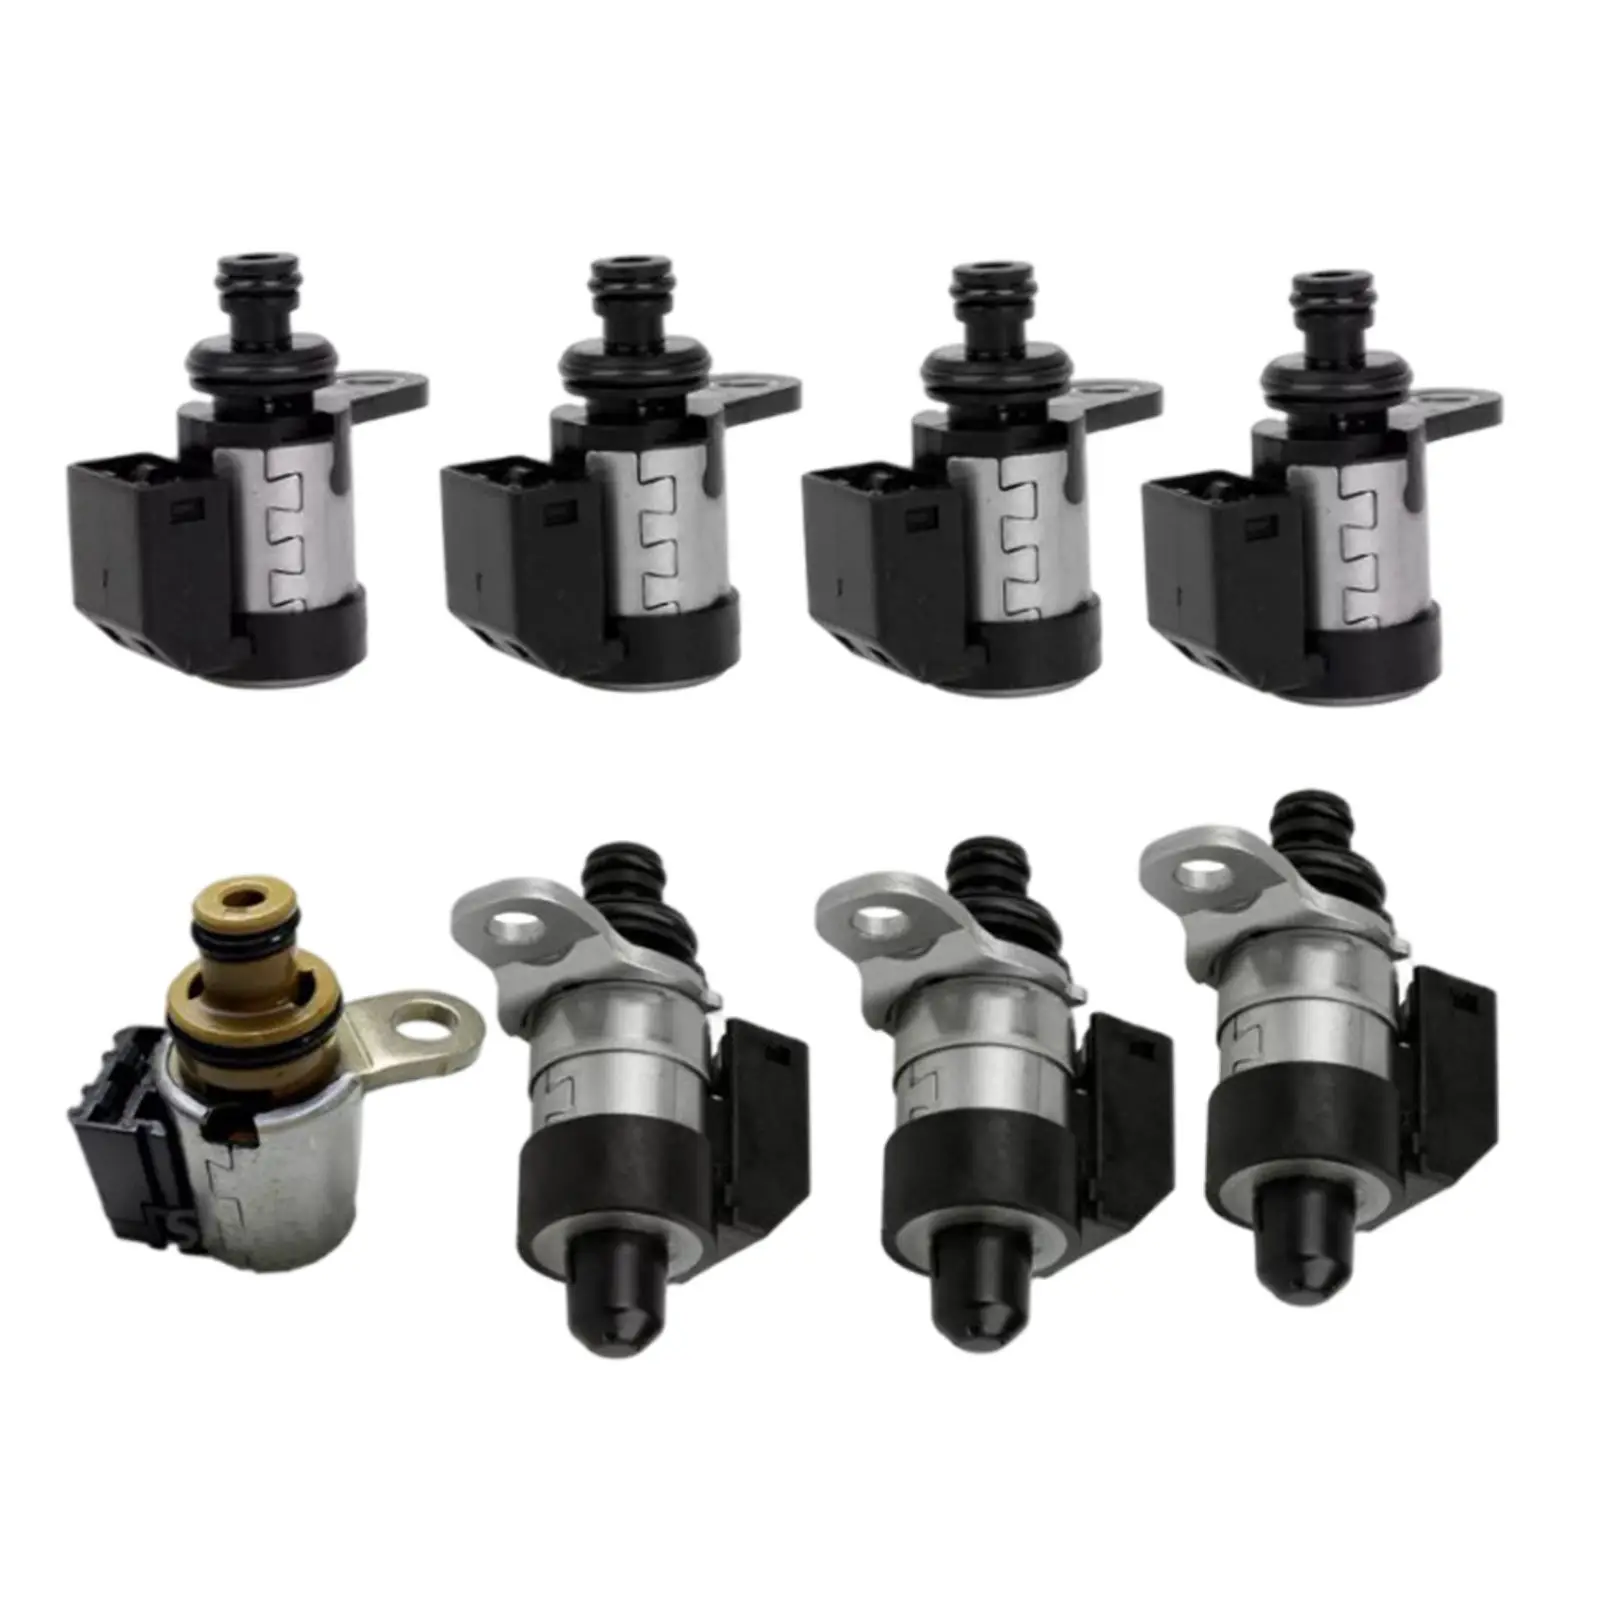 8x Transmiion Solenoids Kit 5EAT 31705-AA430 Car Replacement Acceories